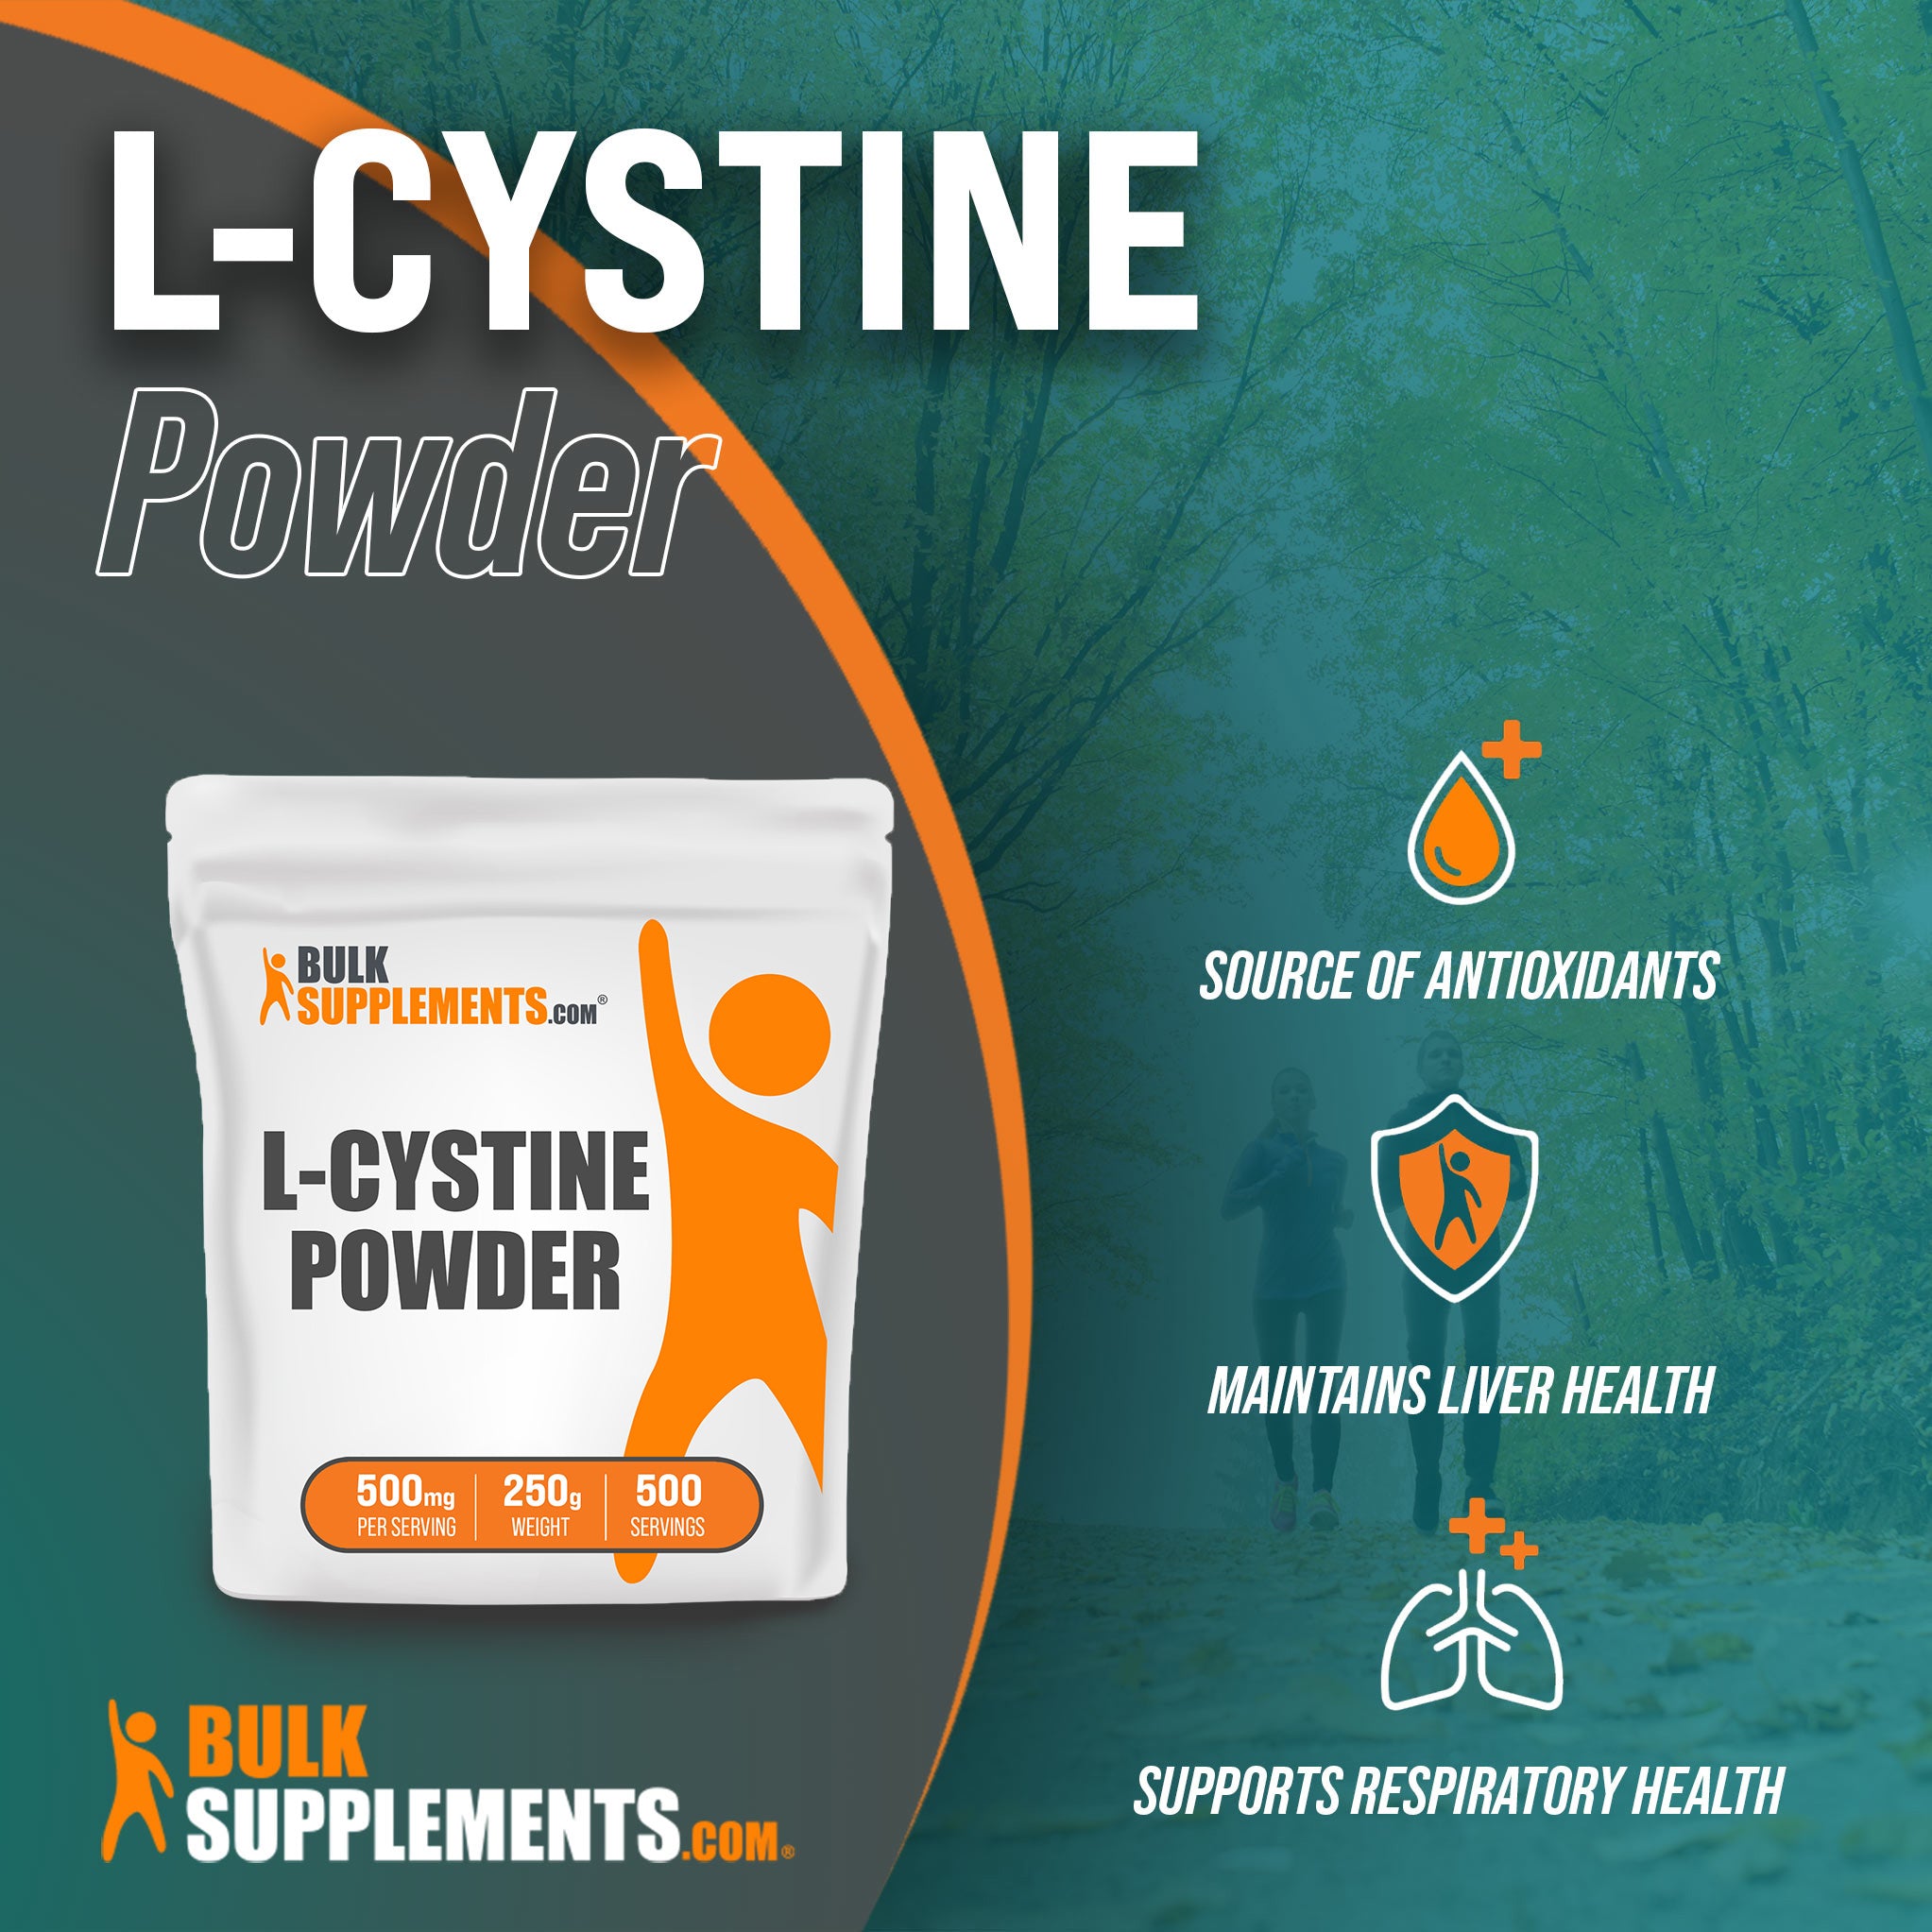 Benefits of L-Cystine: source of antioxidants, maintains liver health, supports respiratory health